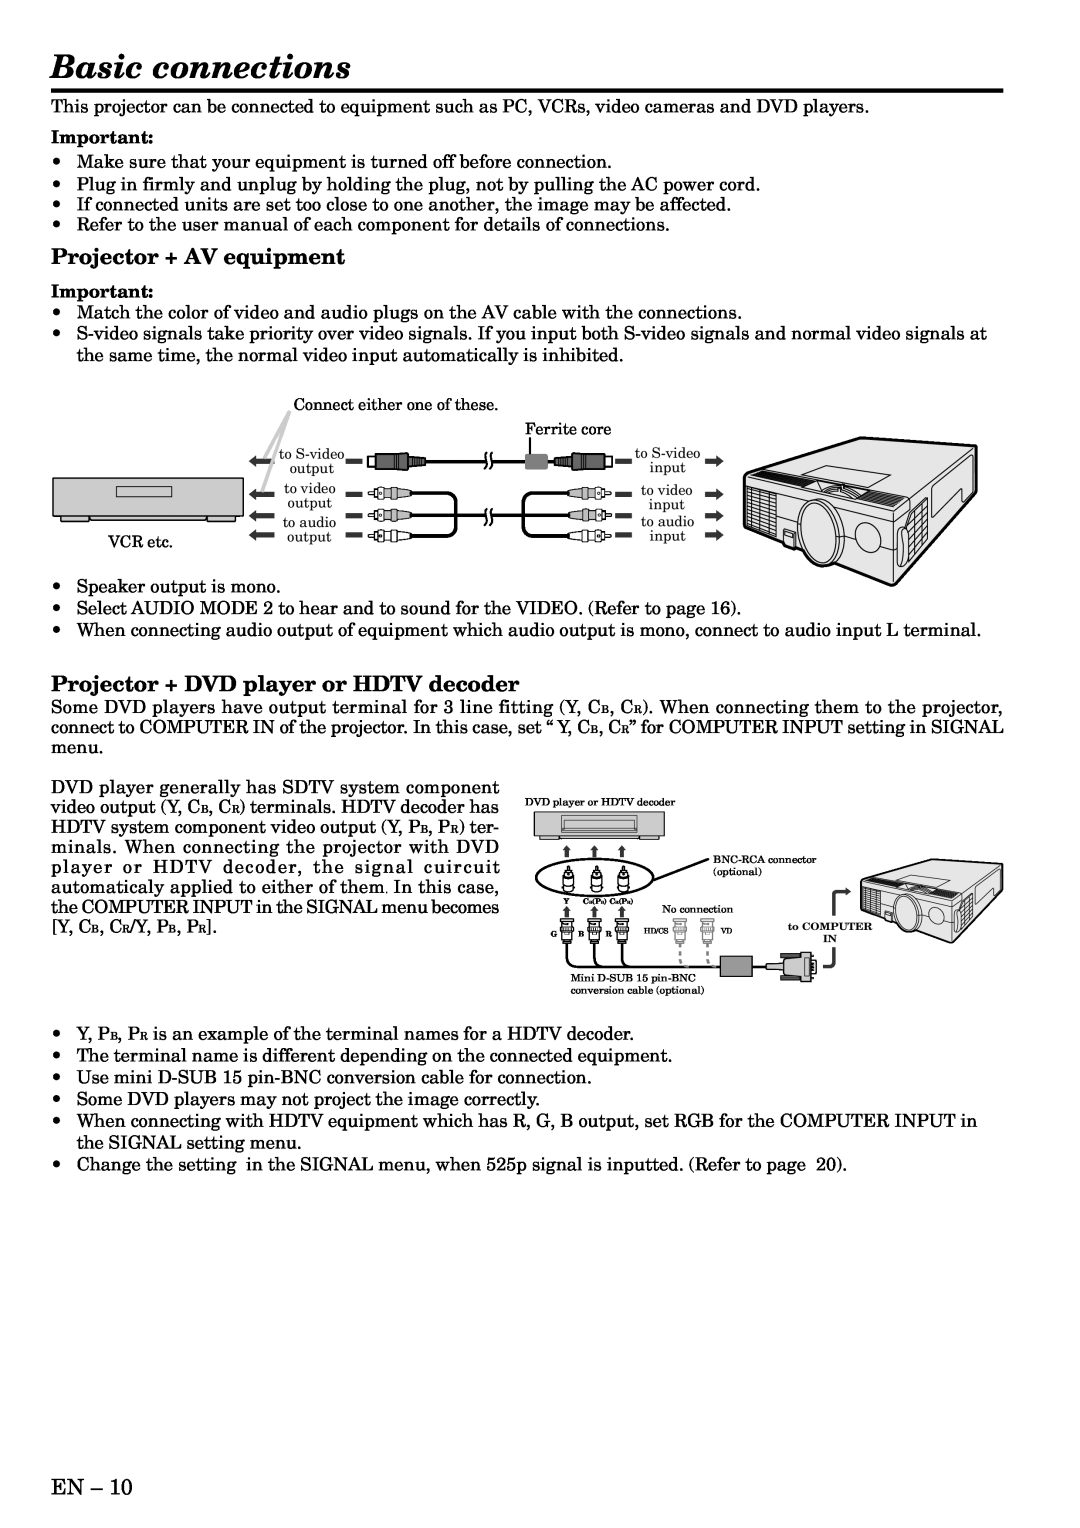 Mitsubishi Electronics X70U user manual Basic connections, Projector + AV equipment, Projector + DVD player or HDTV decoder 